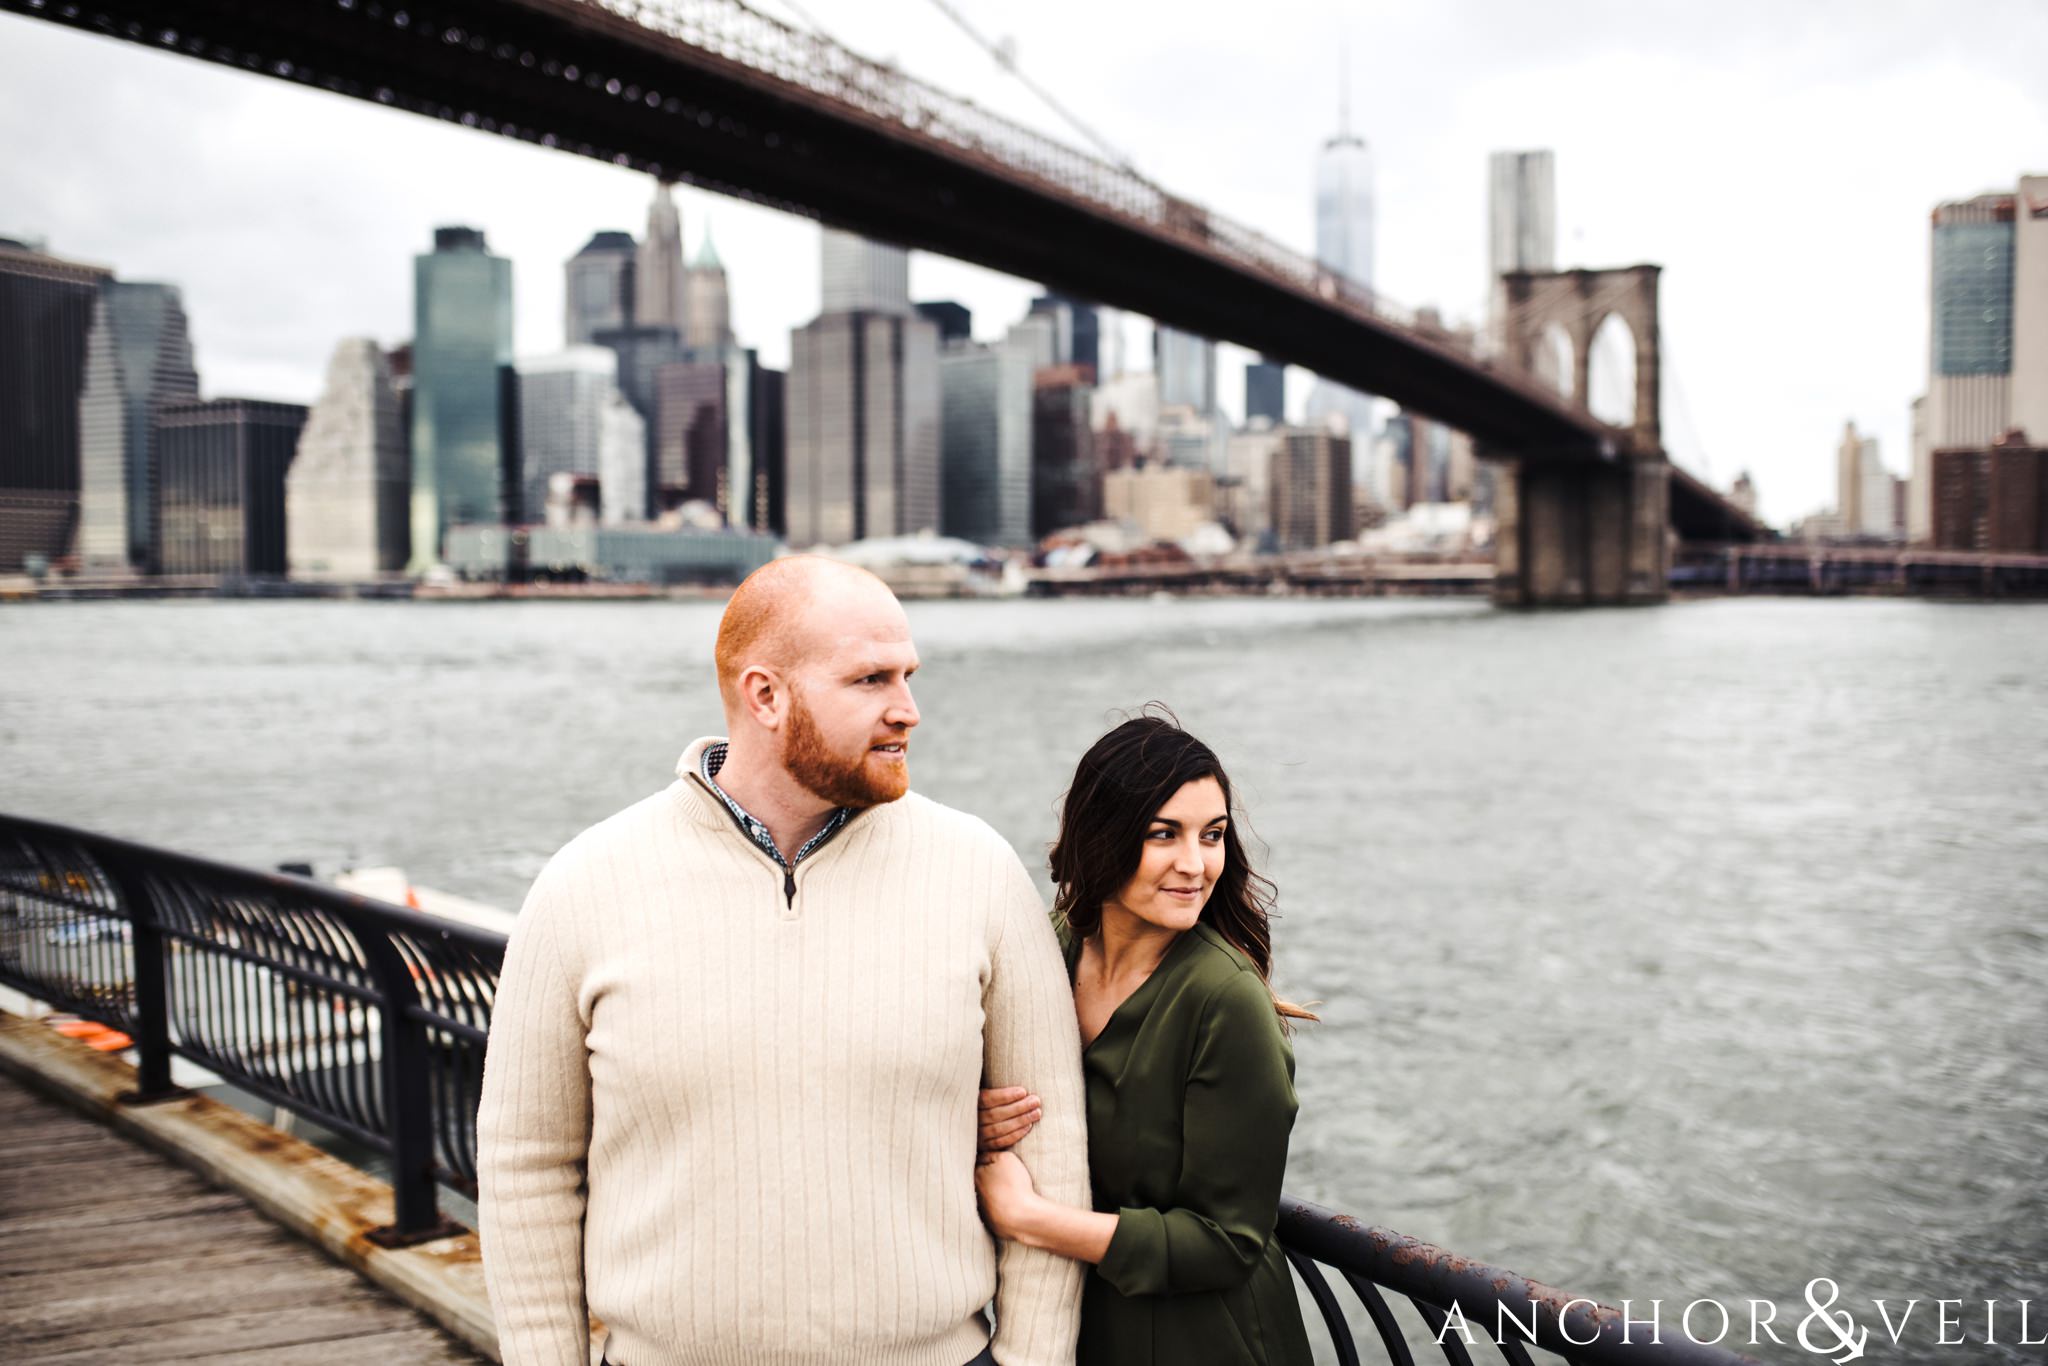 under the bridge with the manhattan skyline During their Dumbo Brooklyn New York engagement session